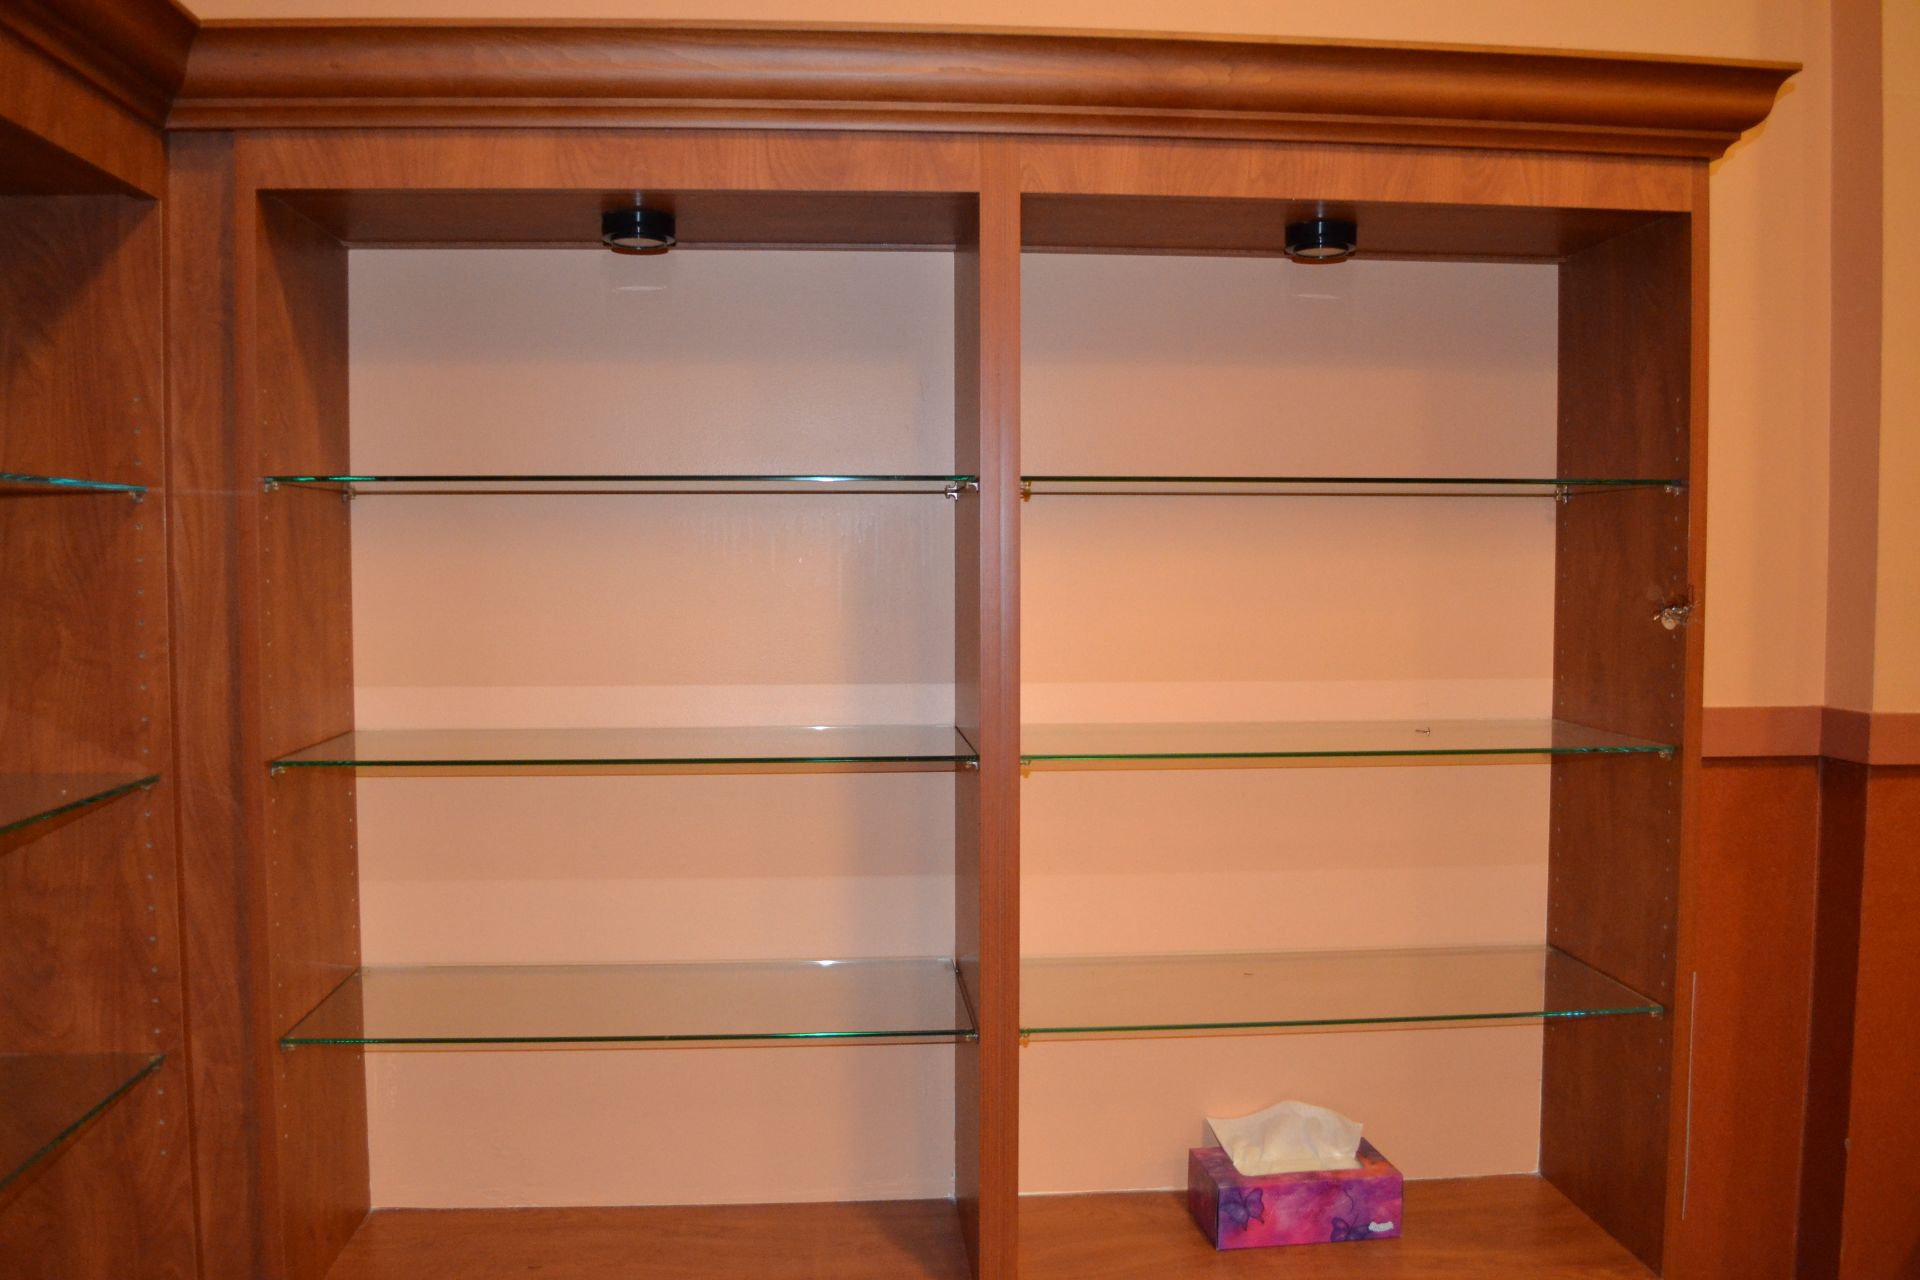 Cherry Formica Corner Shelving w/ Bottom Cabinets - Image 4 of 6